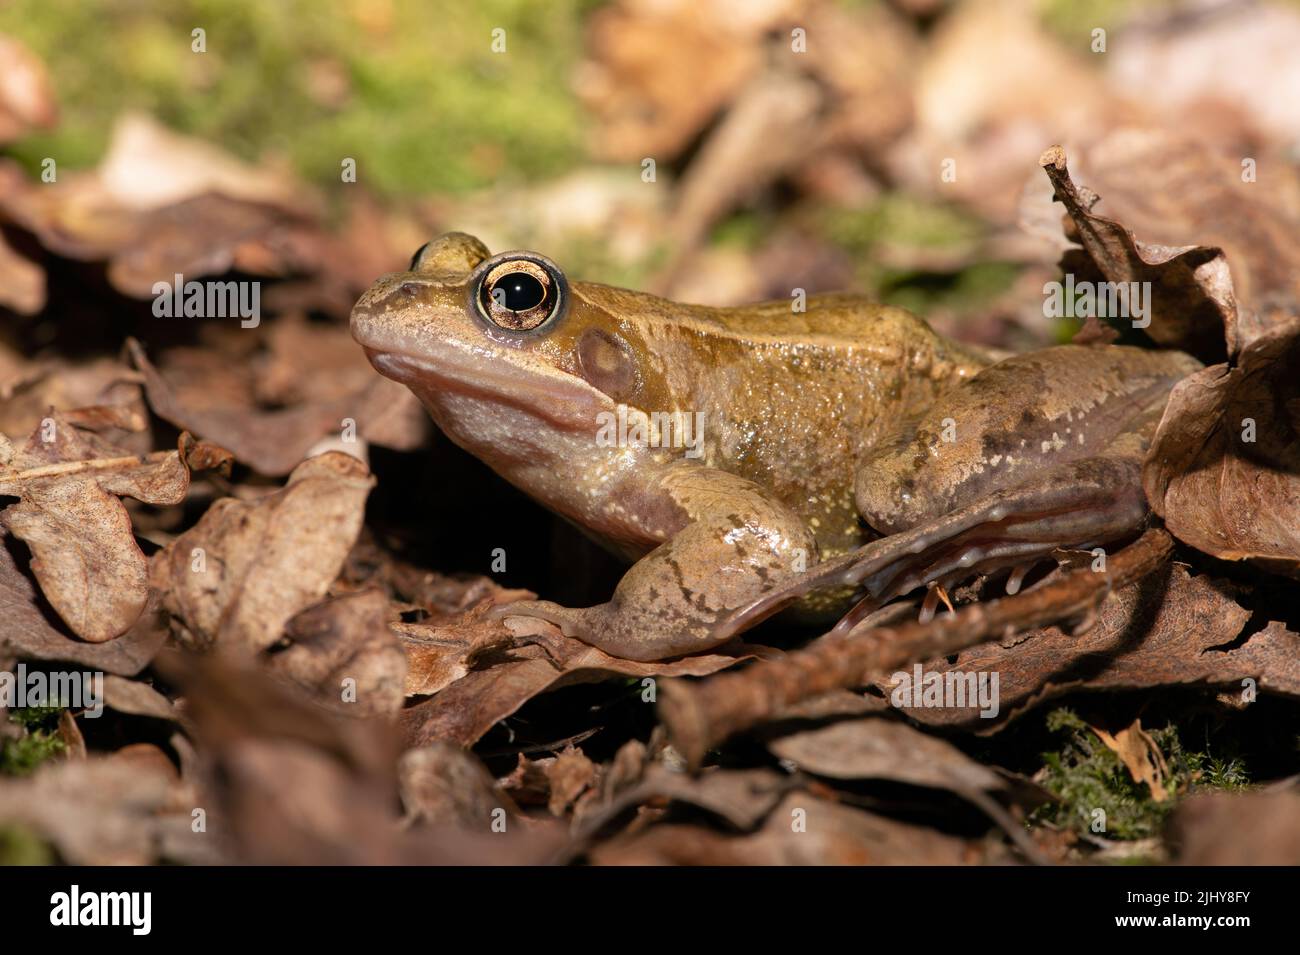 Common Frog (Rana temporaria) on a forest floor Stock Photo